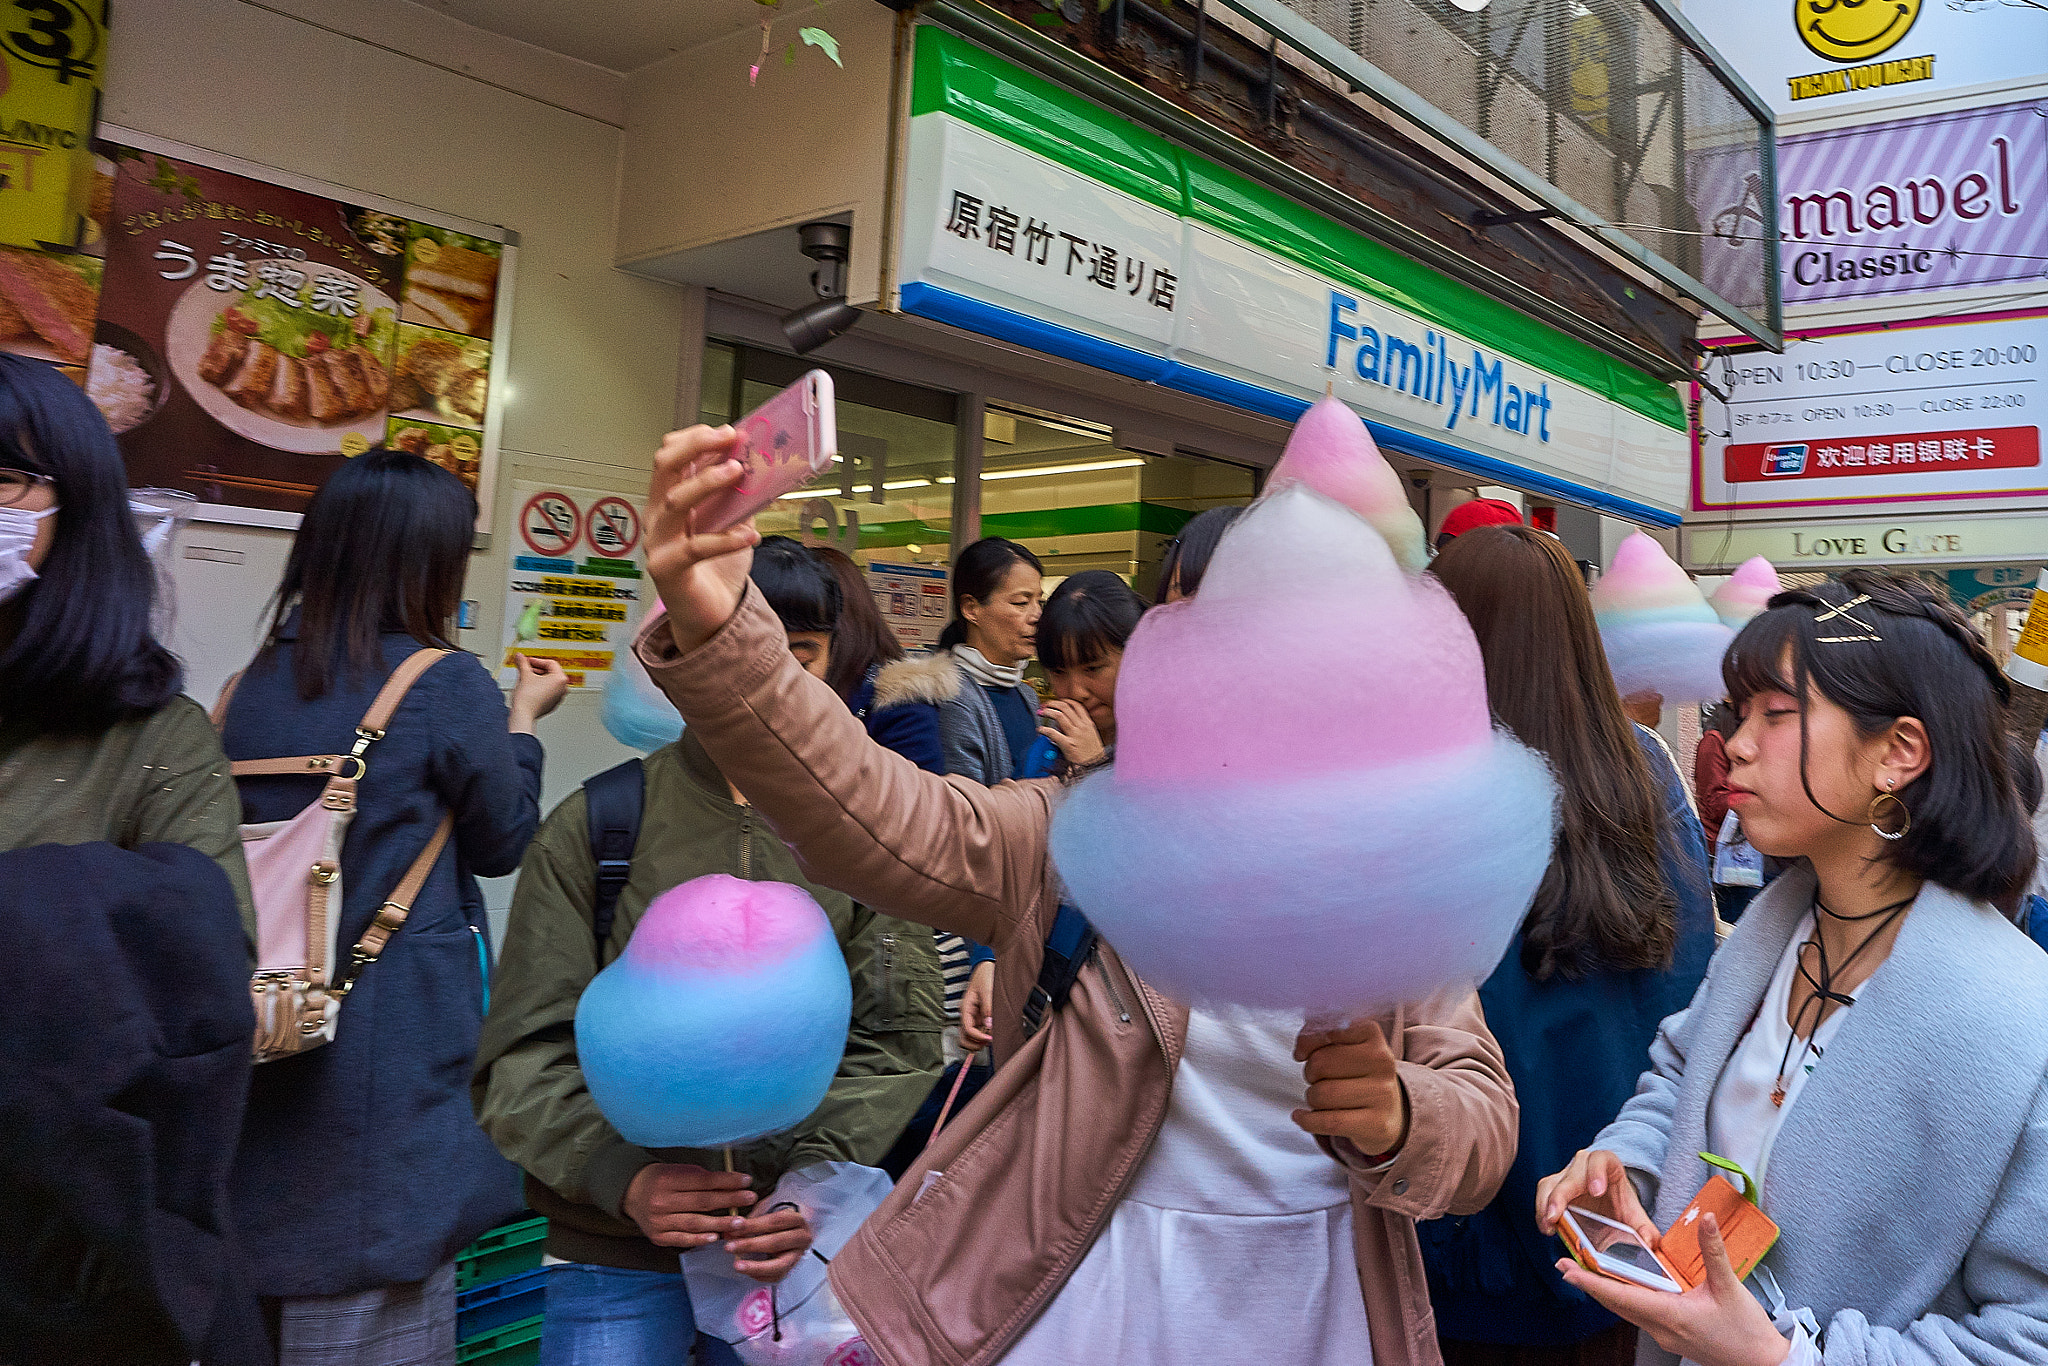 Sony a7 II sample photo. Cotton candy photography